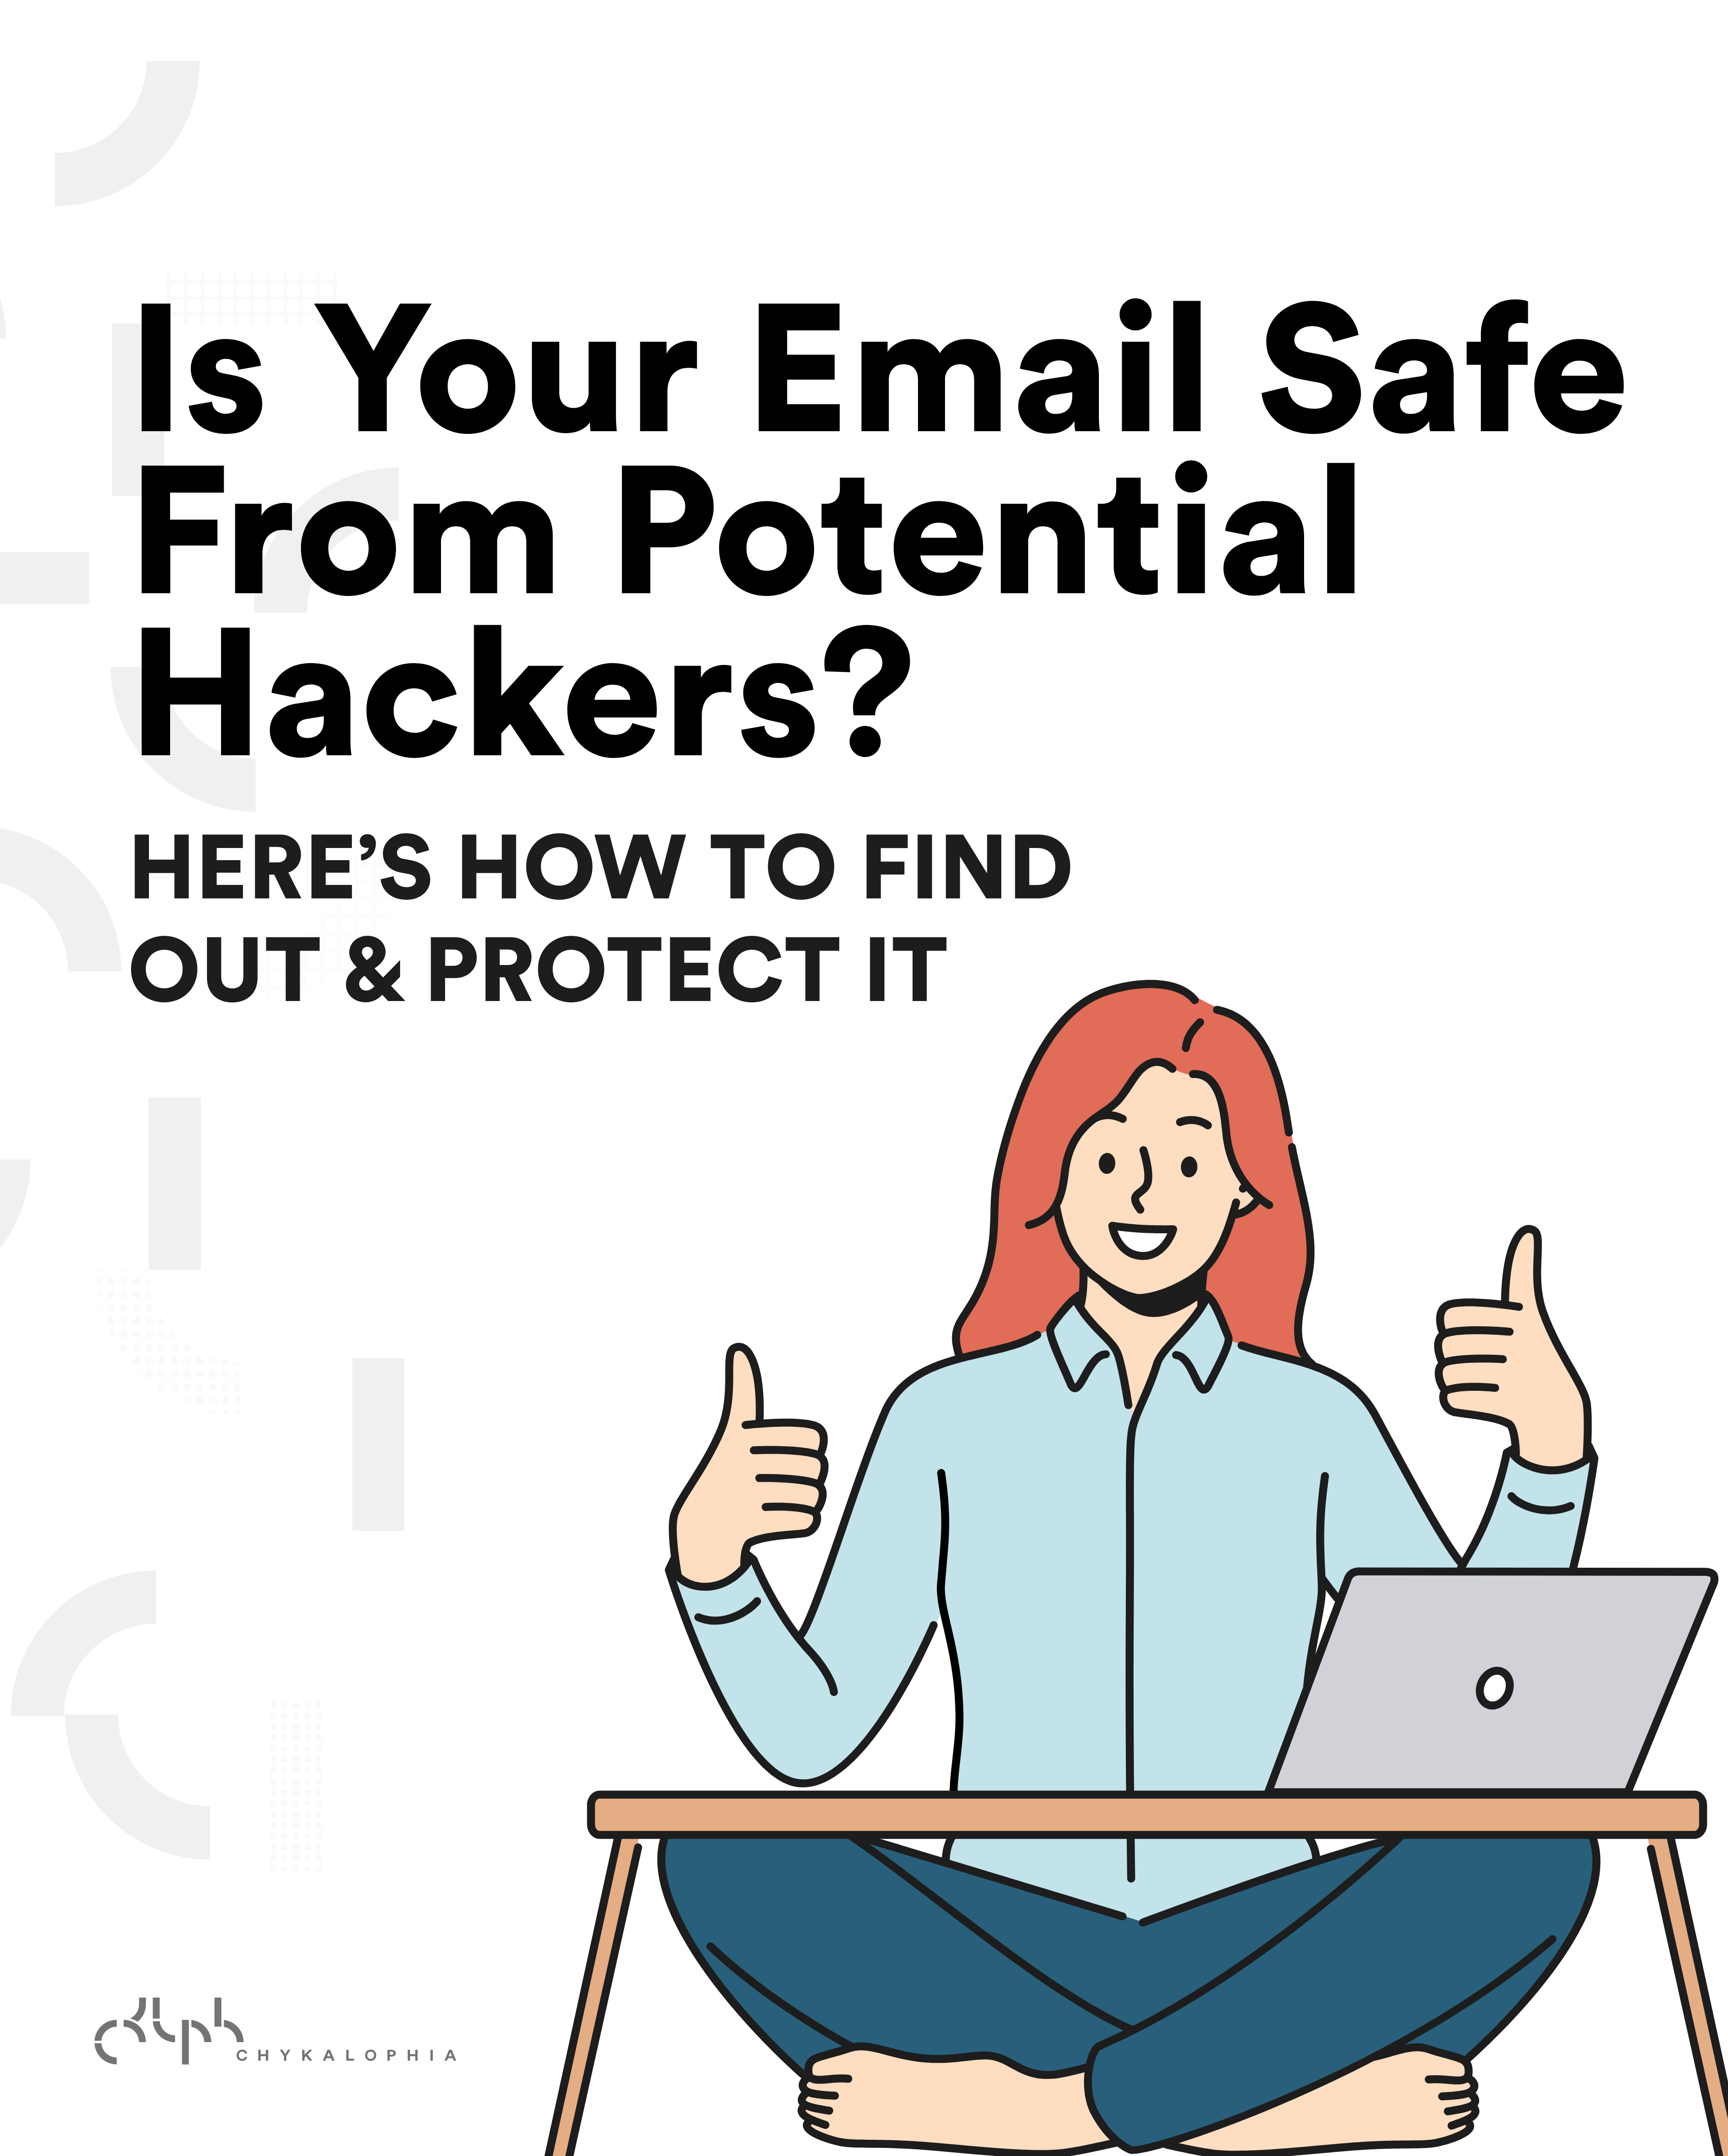 Email Security: How to Protect & Secure Your Email Address Against Email Hackers